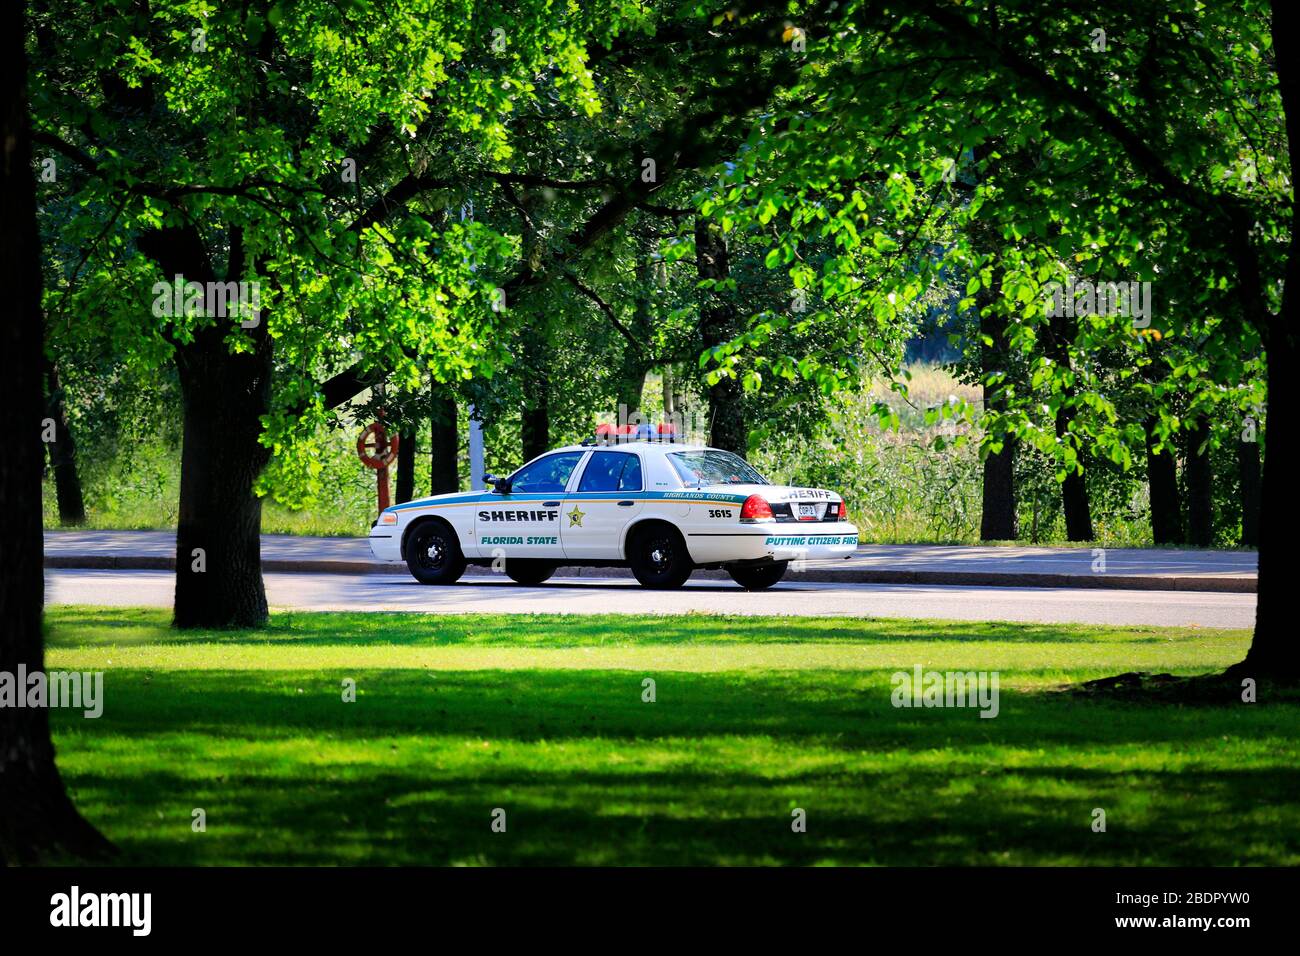 Retired sheriff patrol car 3615 Florida State Highlands County driving on street in Helsinki, Finland. July 16, 2018. Stock Photo